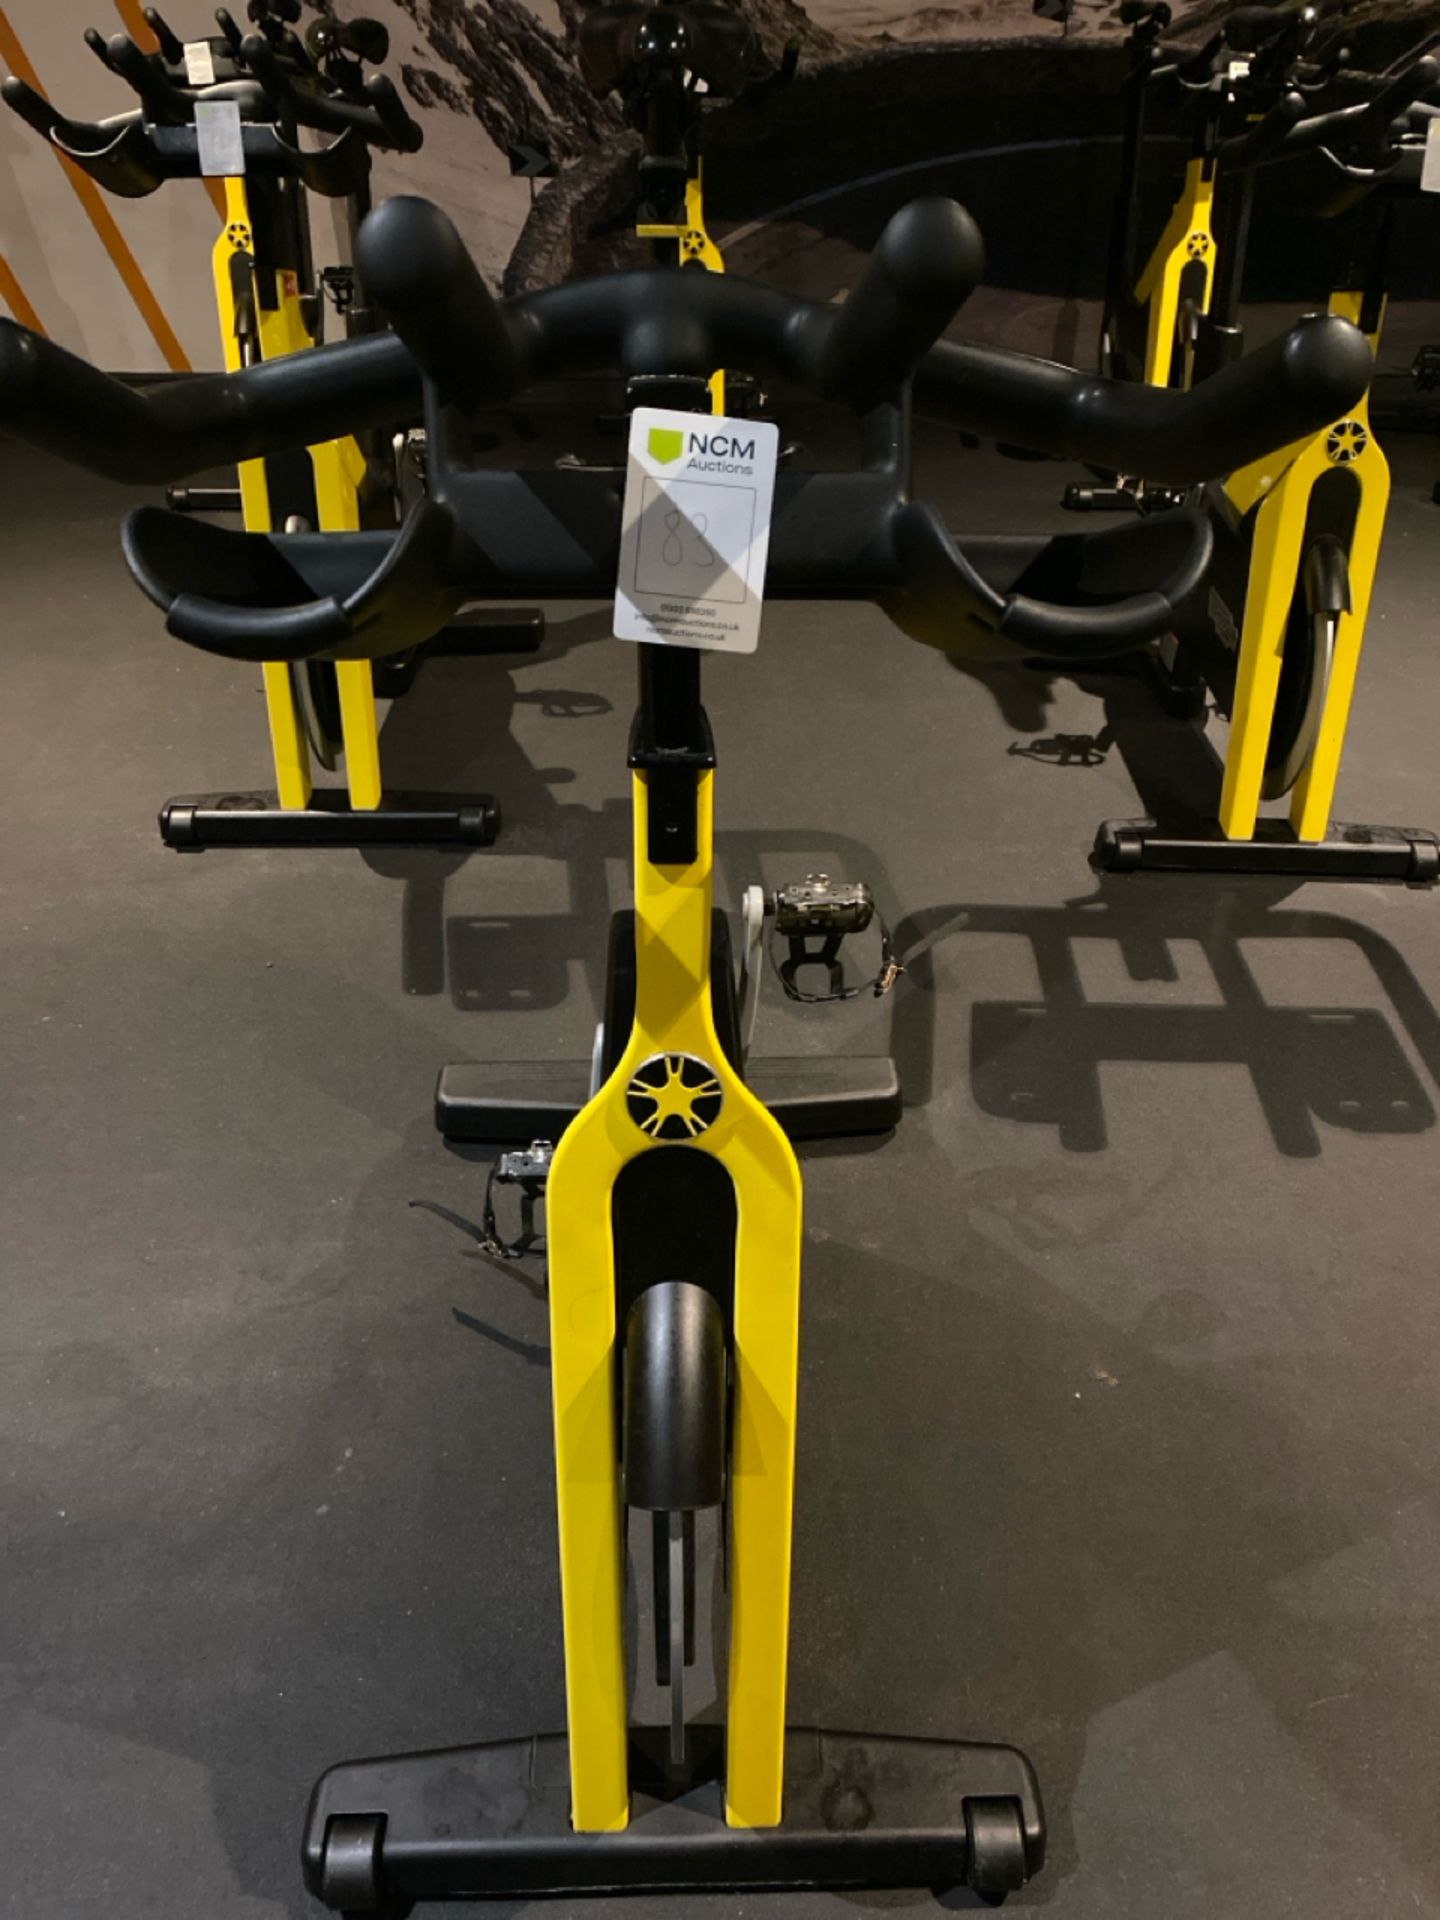 Technogym Group Cycle Ride Spin Bike - Image 8 of 8